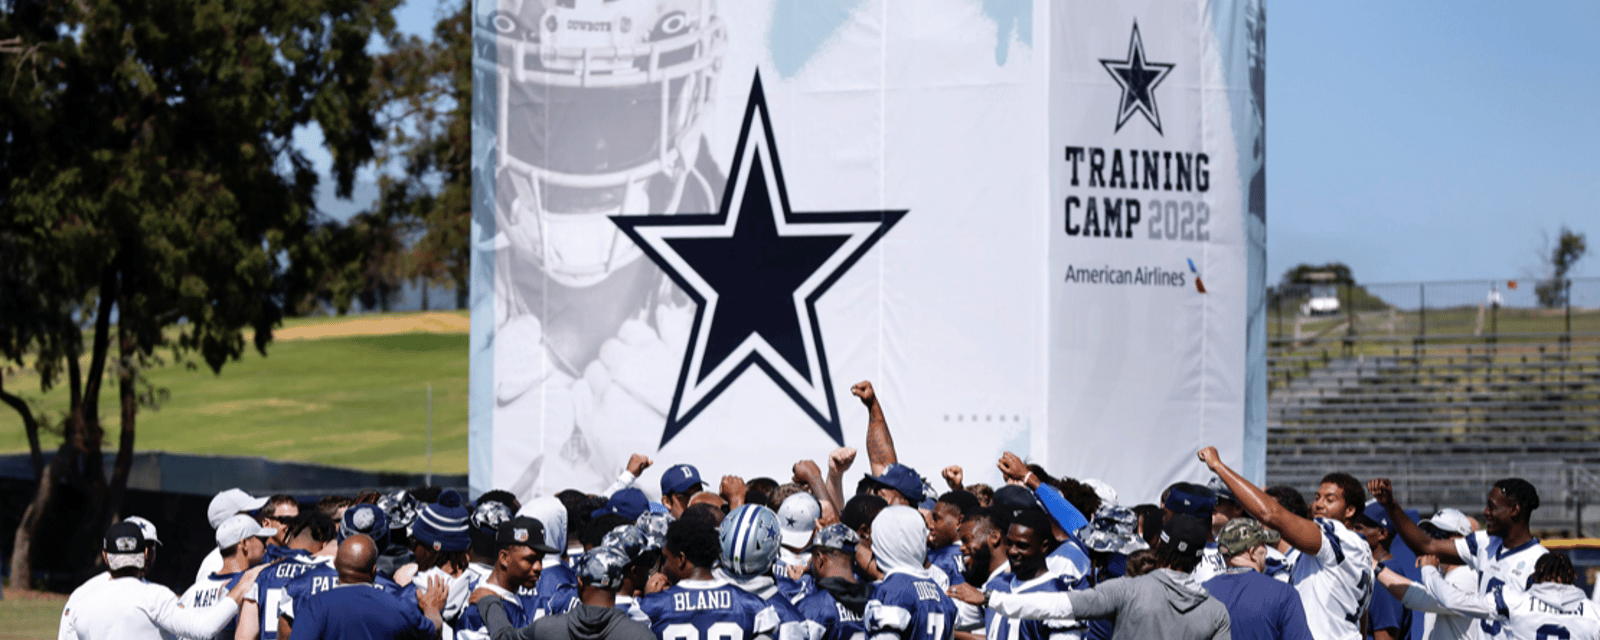 Oxnard residents are furious at the Dallas Cowboys 